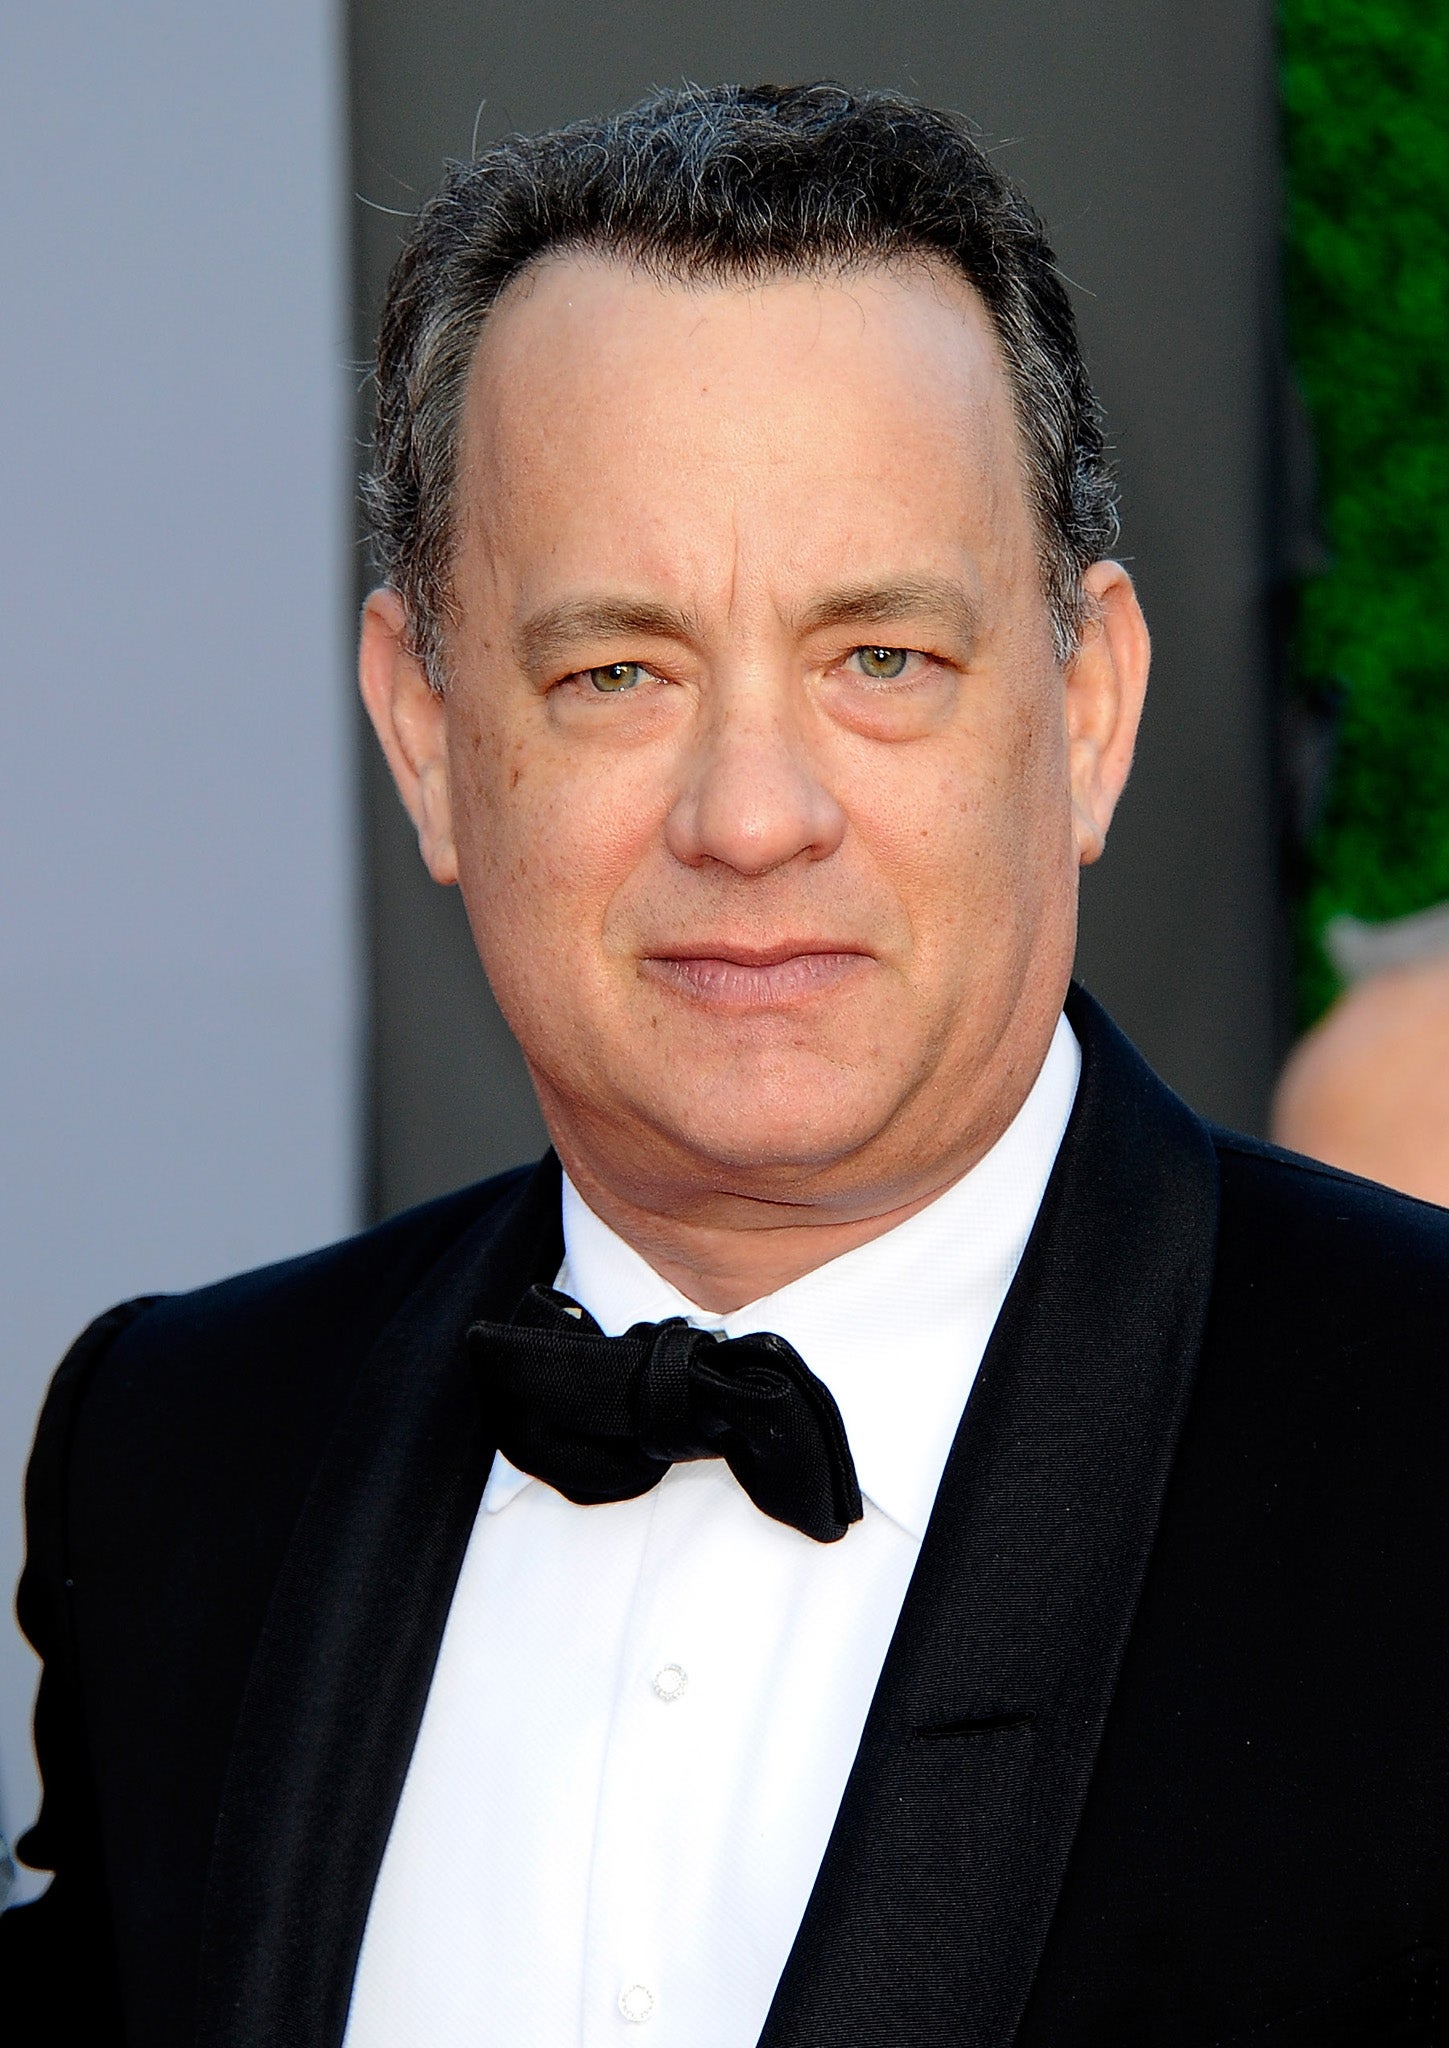 Tom Hanks says diabetes now prevents him from gaining weight for roles